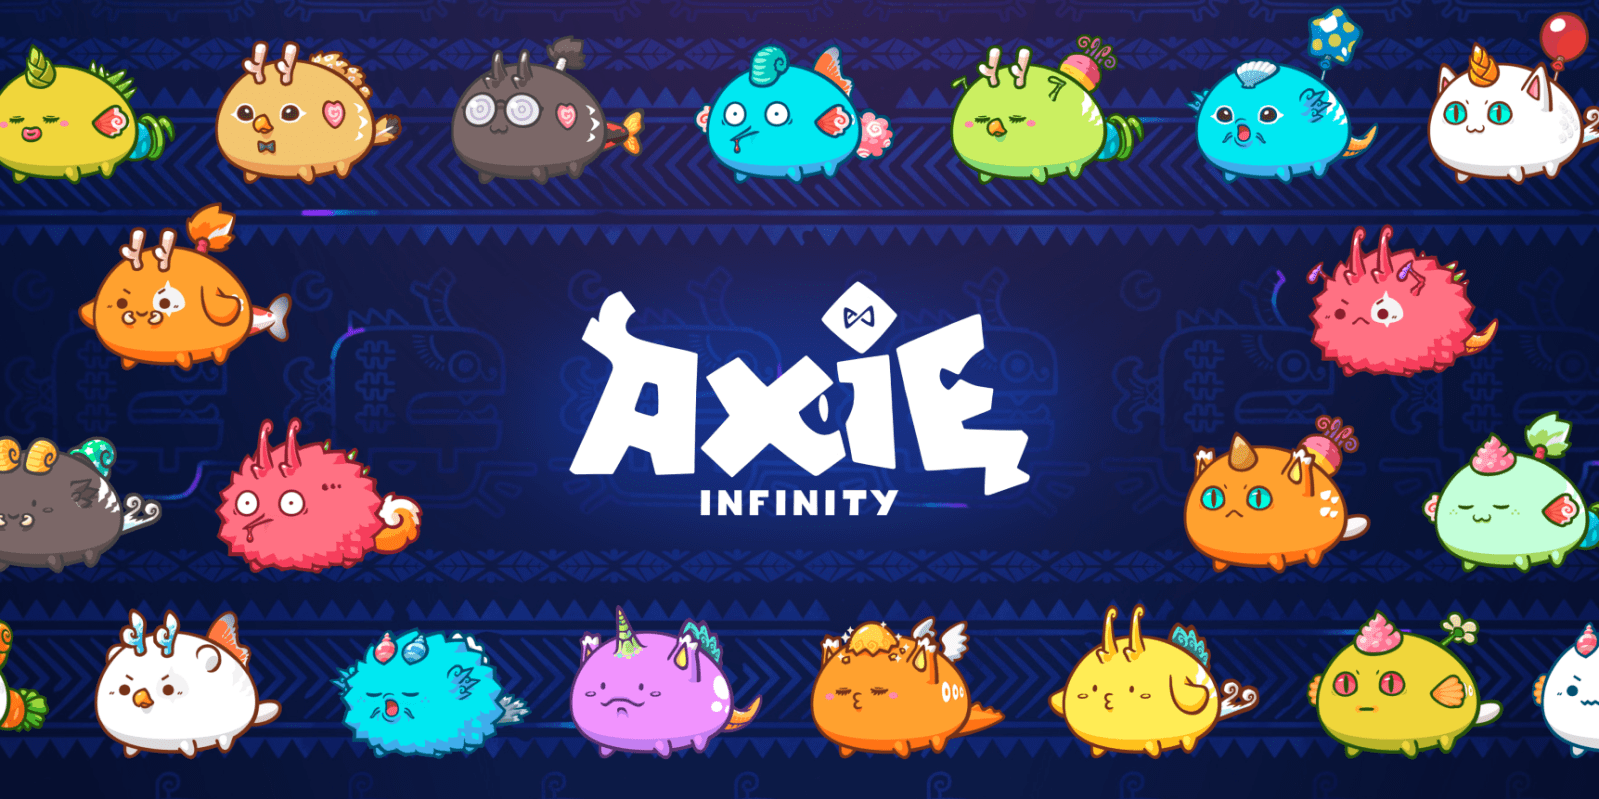 Axie Infinity Tokenomics: What Is The Difference Between $AXS and $SLP?